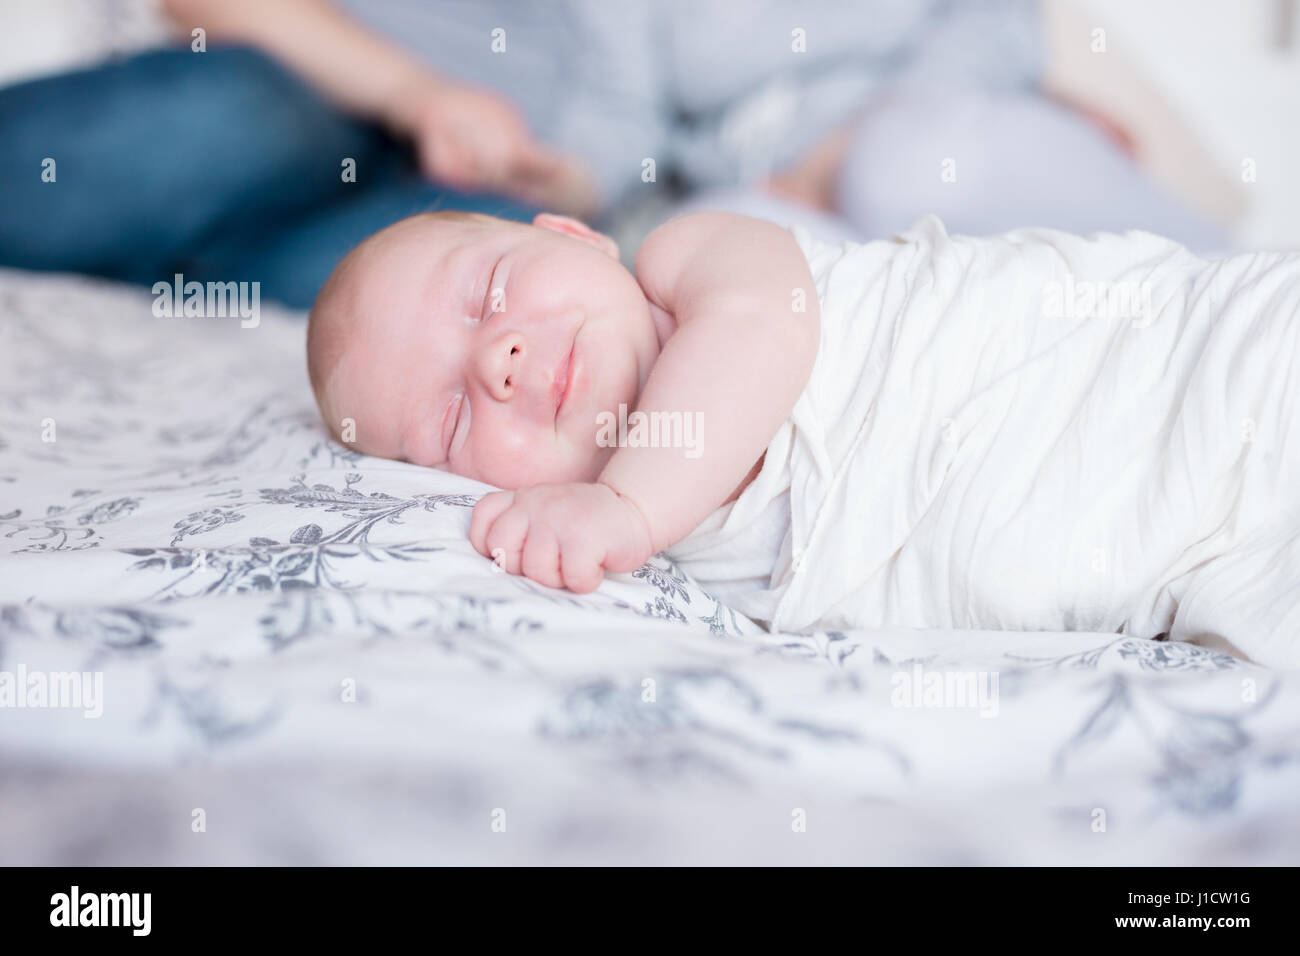 Young parents resting in bed, their newborn daughter sleeping in th e foreground. Stock Photo